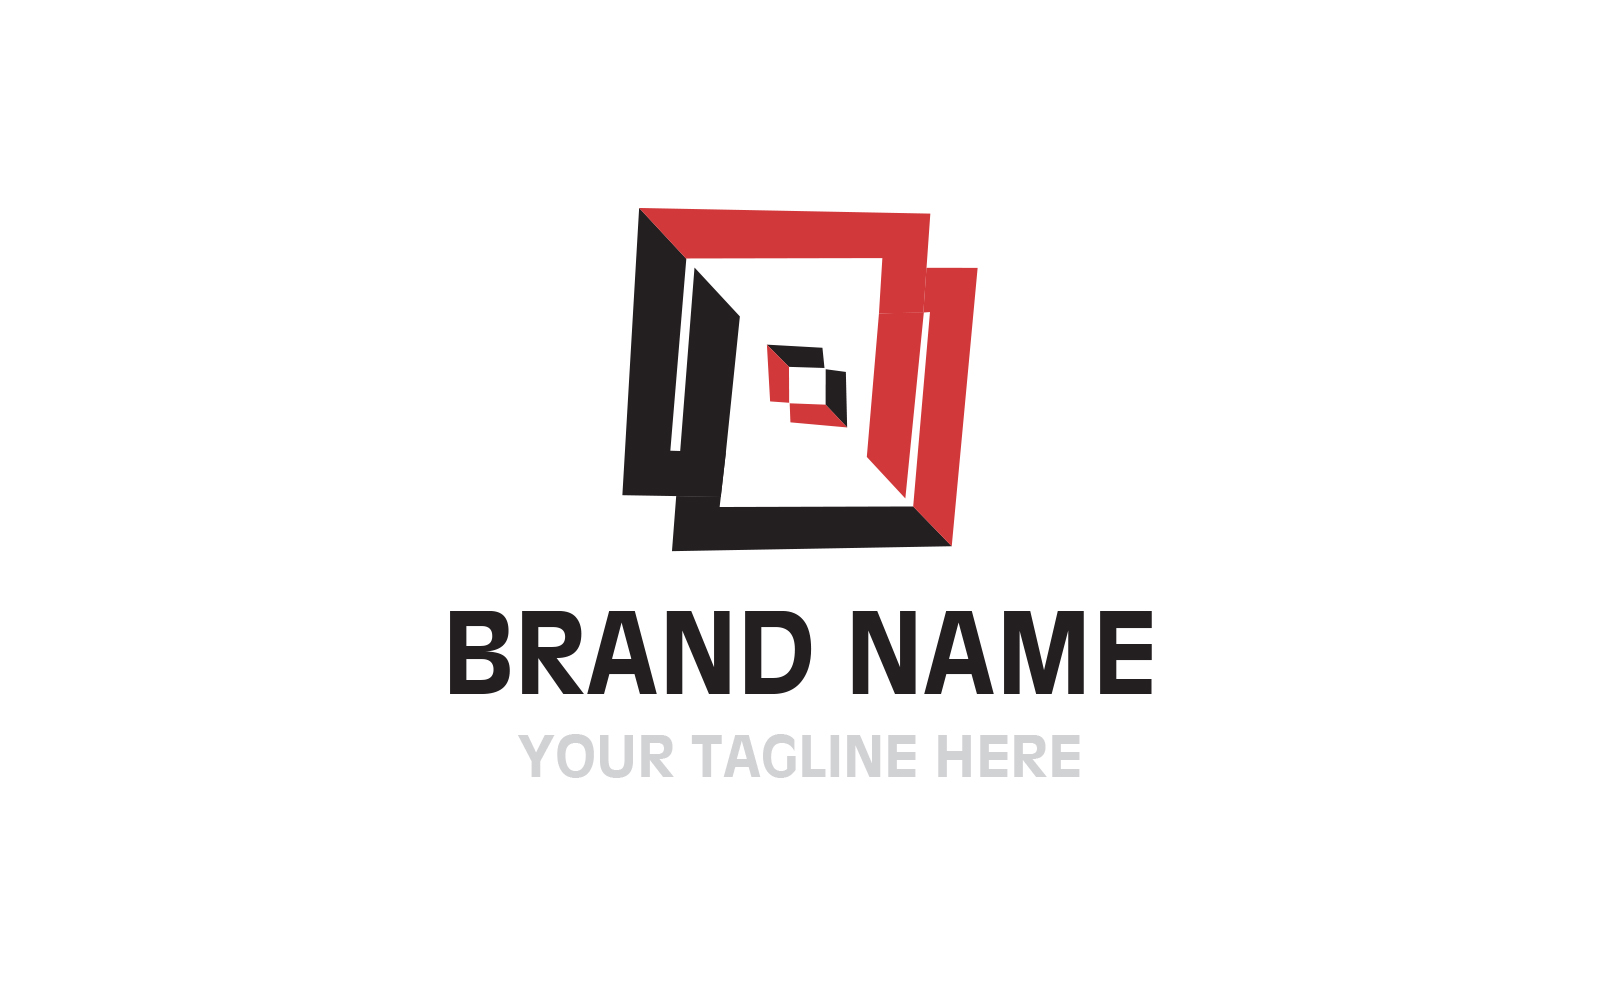 Brand Name logo for all products